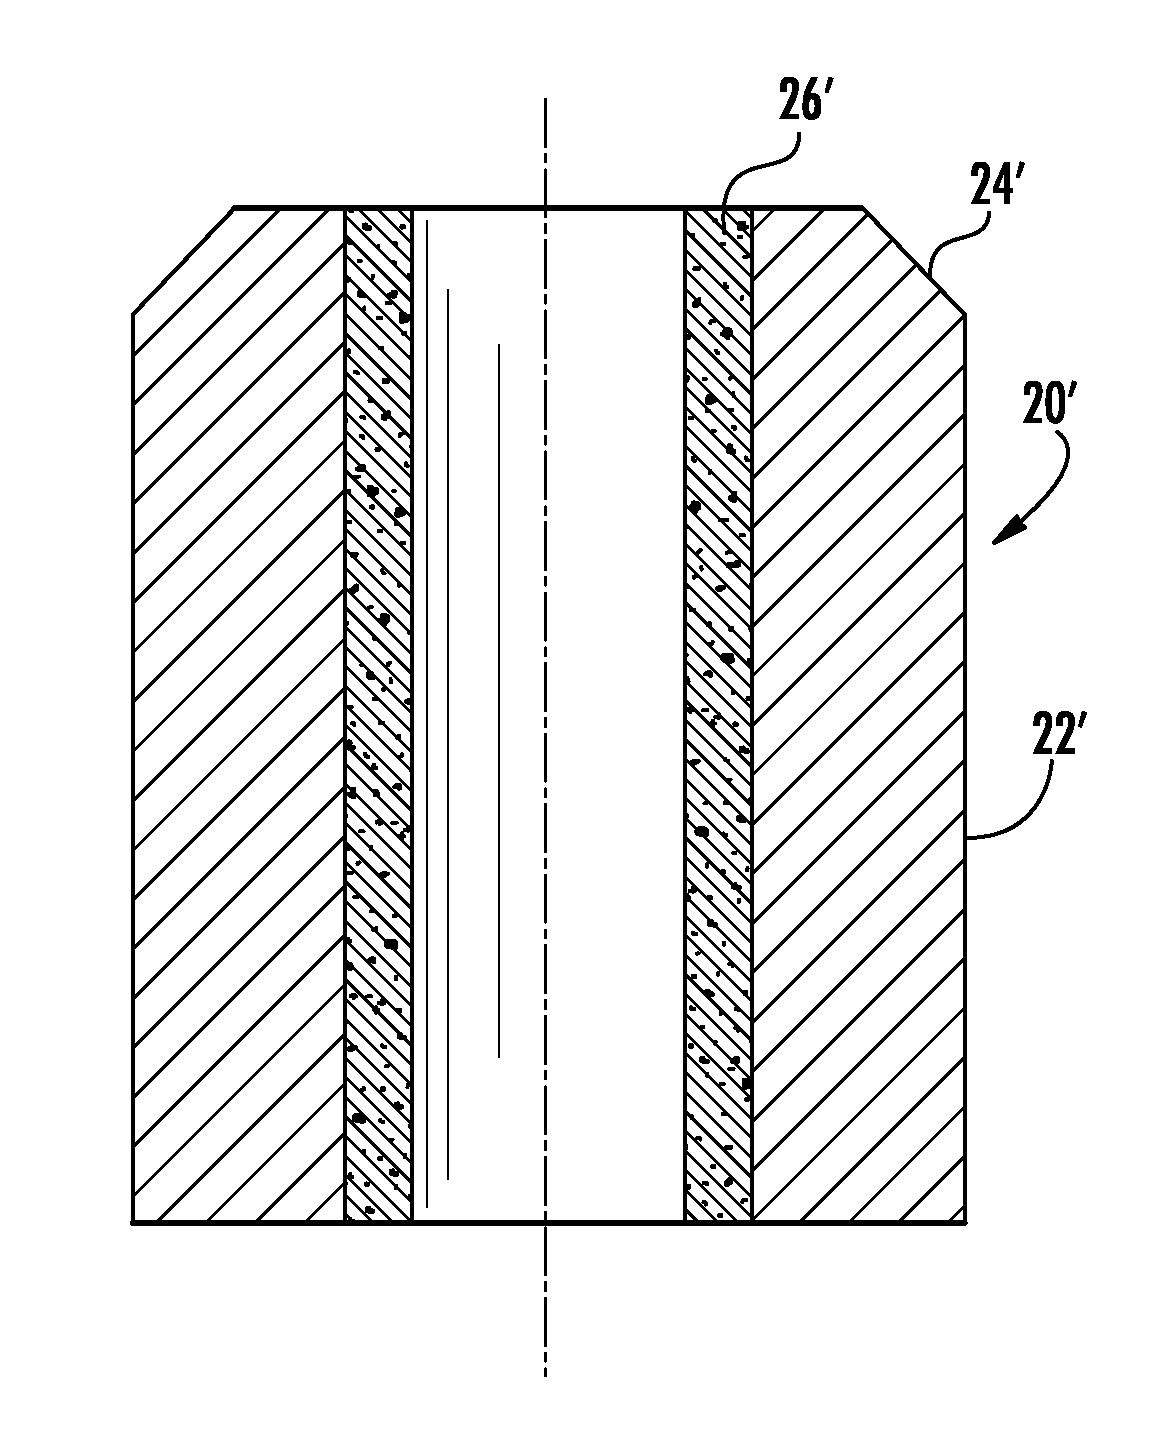 Methods for Manufacture and Use of Composite Preform Having a Controlled Fraction of Porosity in at Least One Layer